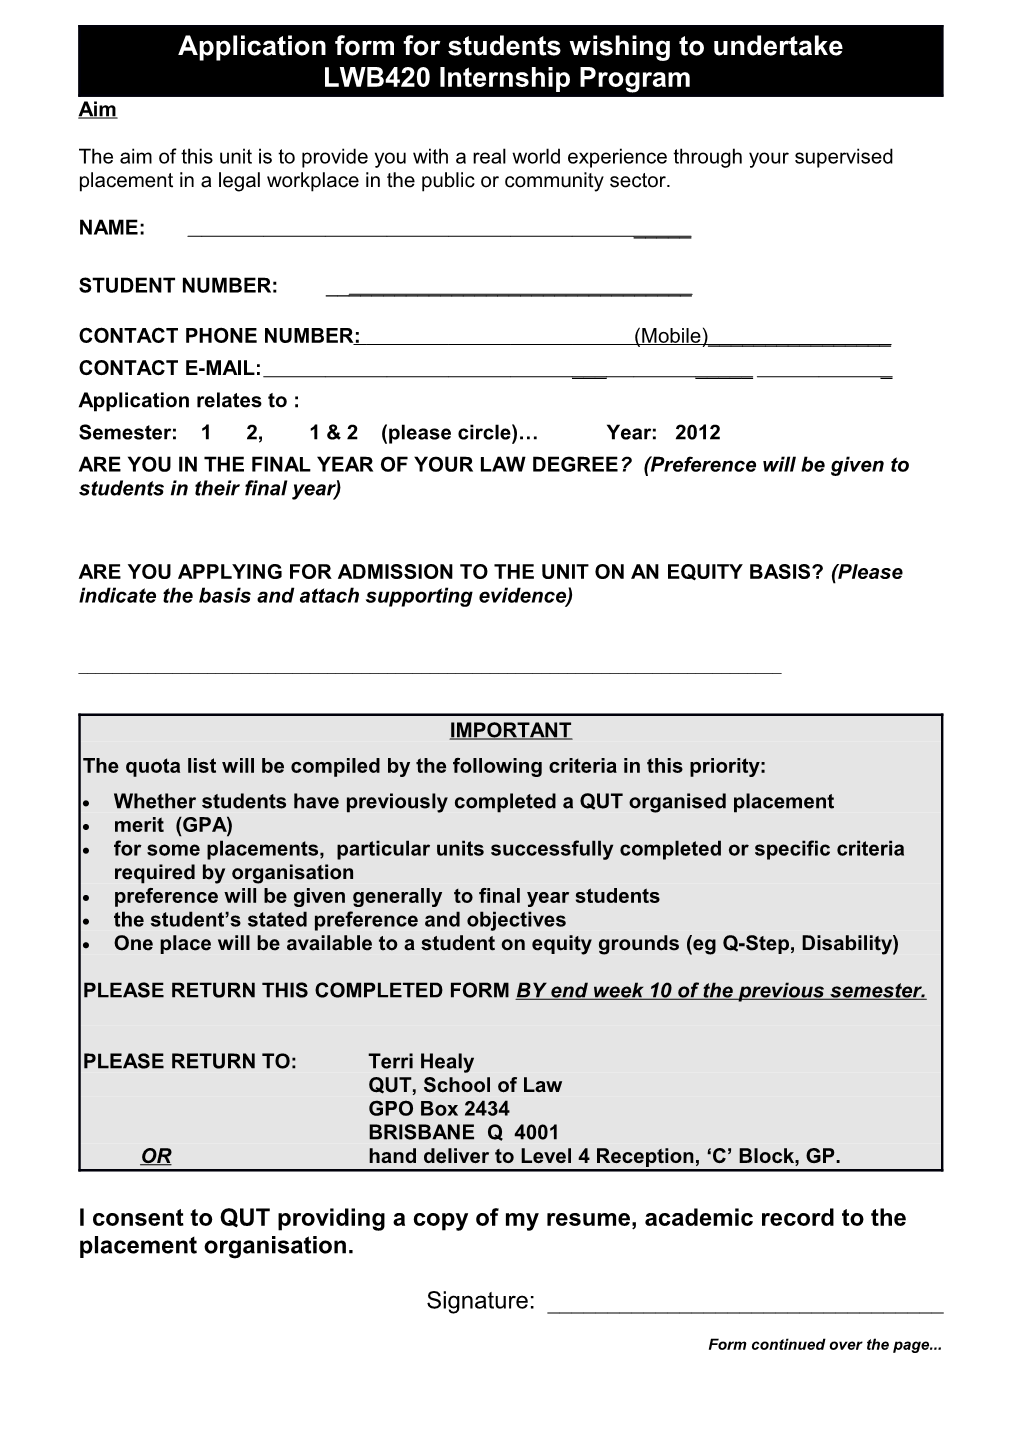 Application Form for Students Wishing to Undertake